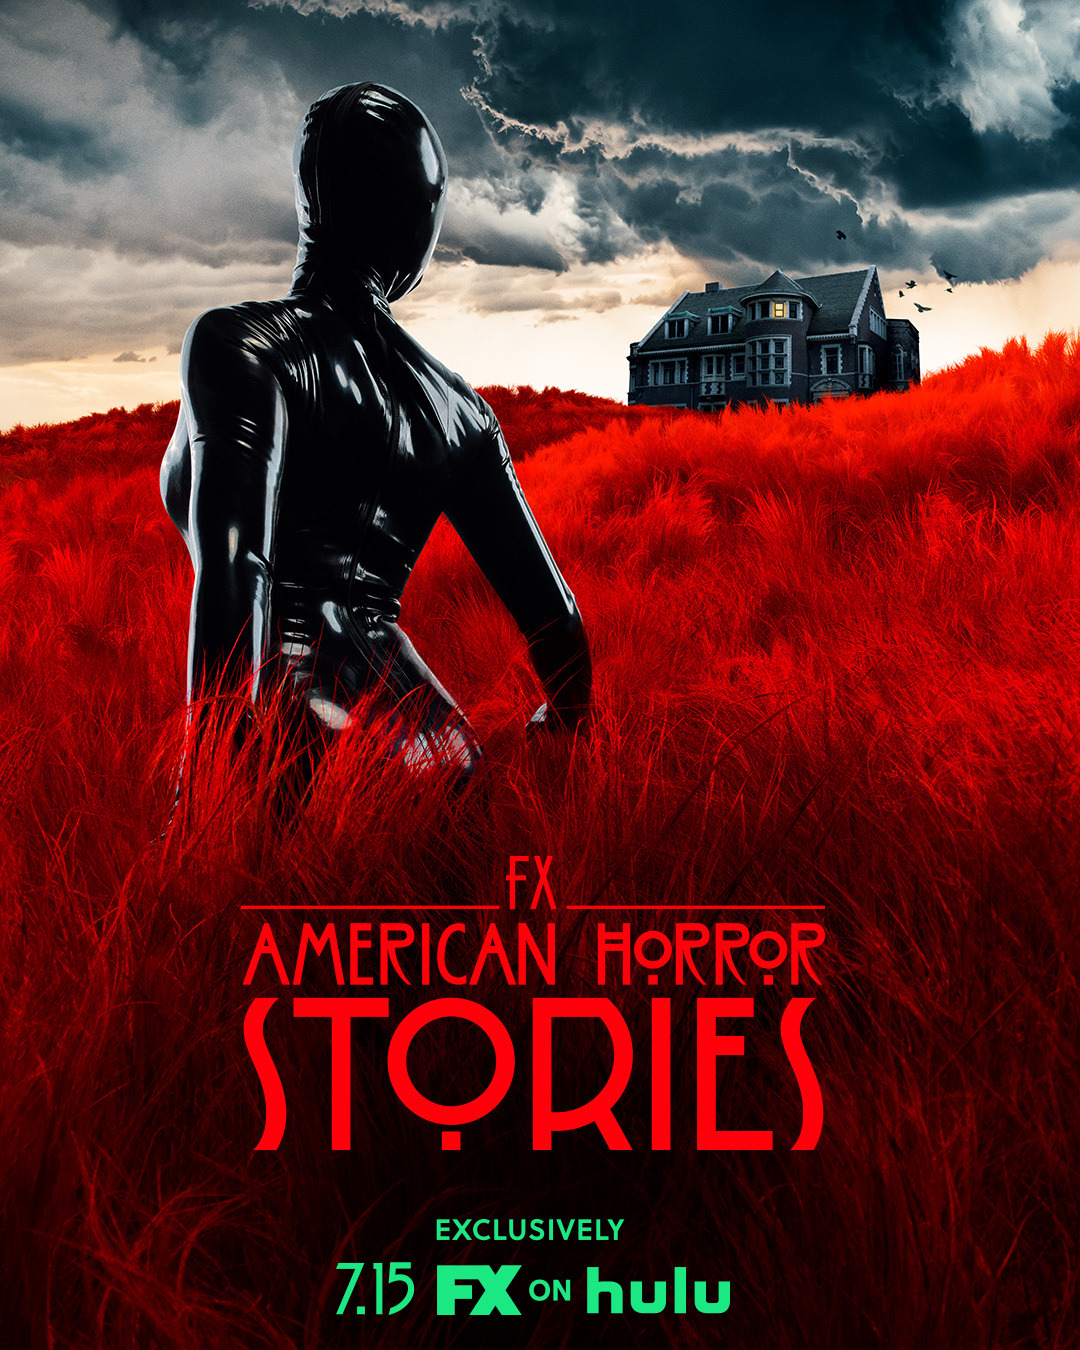 Extra Large Movie Poster Image for American Horror Stories (#2 of 17)